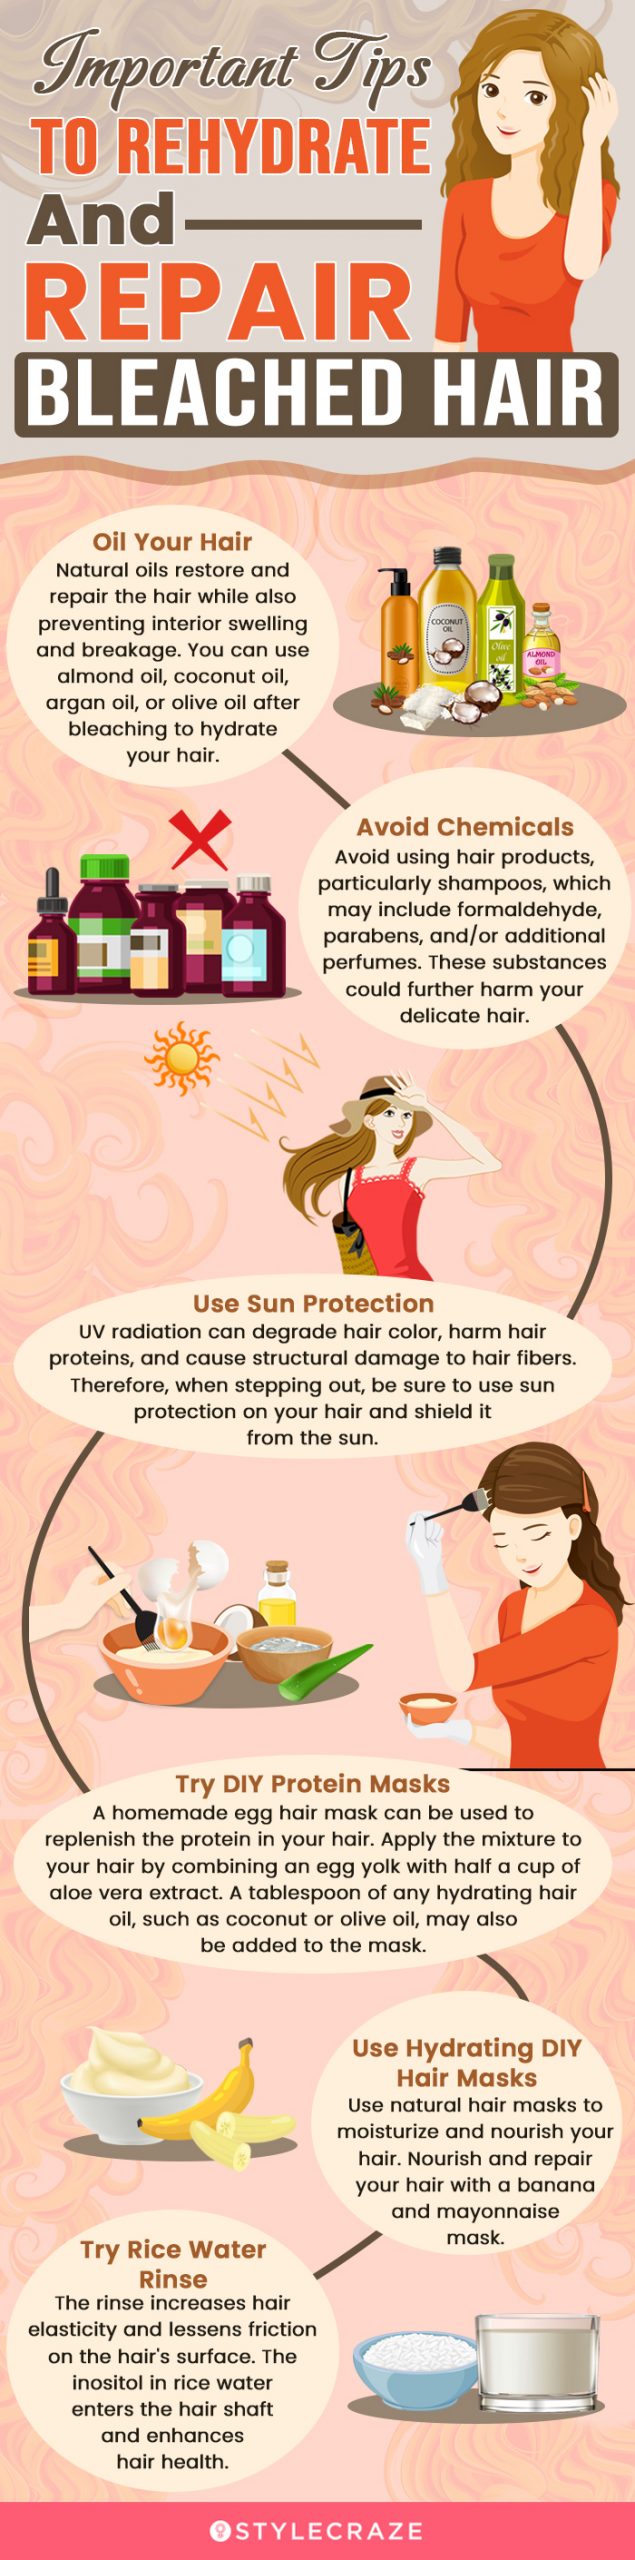 important tips to rehydrate and repair bleached hair (infographic)